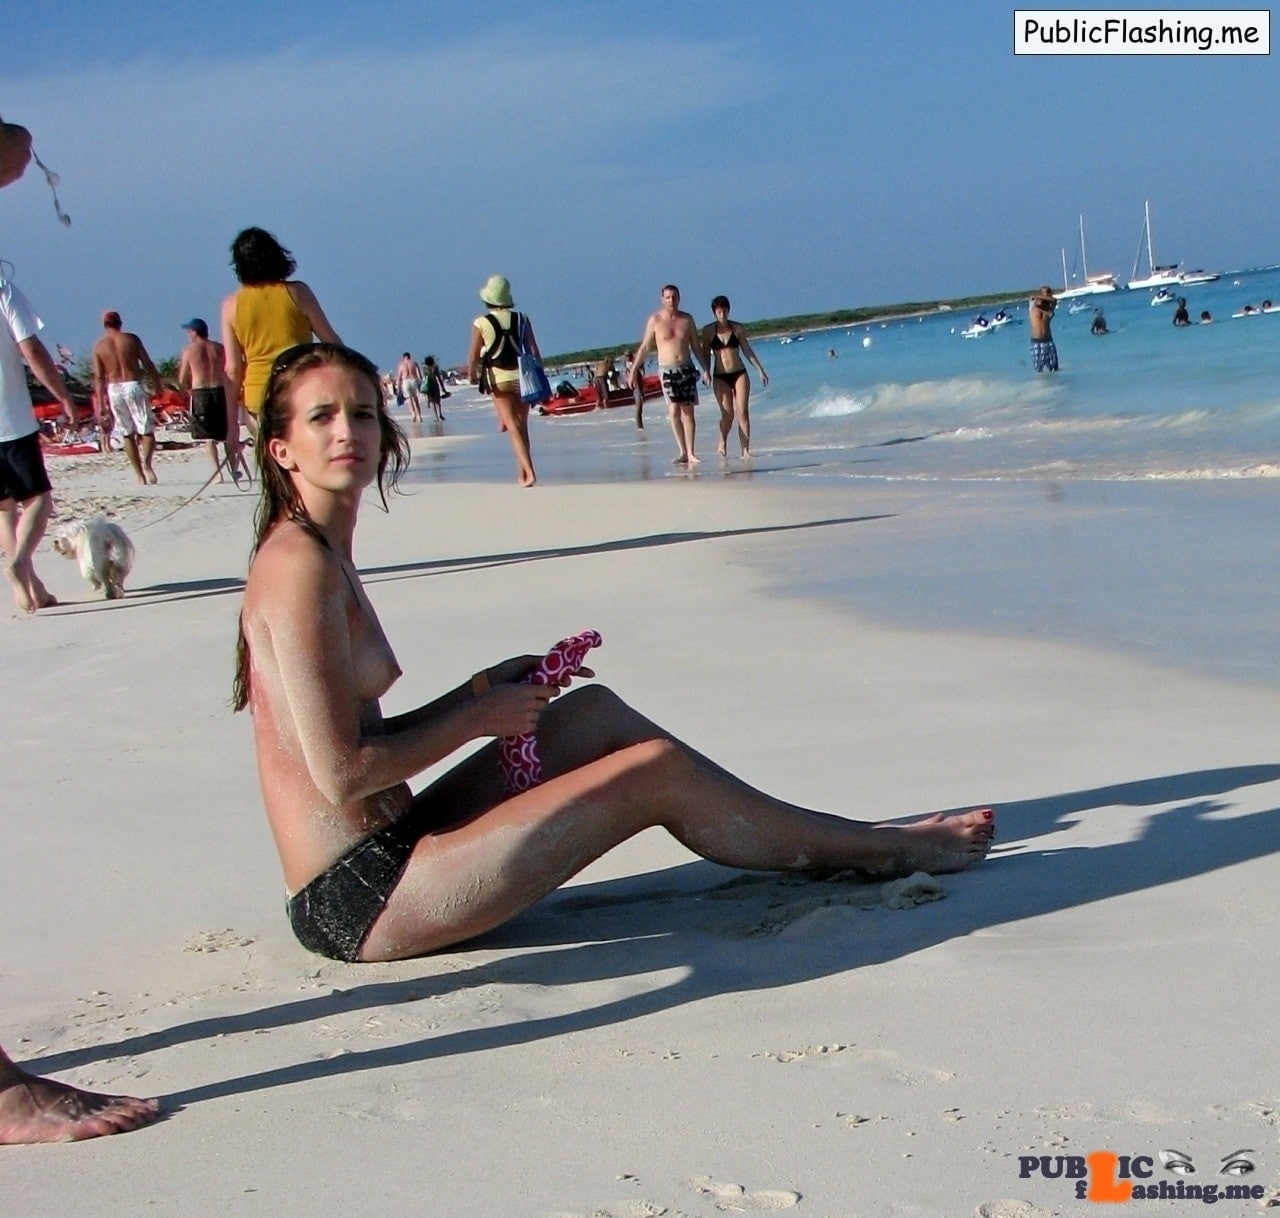 teen topless - Teen brunette is sitting in the sand topless Cute teenage brunette is on the beach, sunbathing topless on the afternoon Sun and enjoy in a freshness of the ocean. She is sitting in the sand without bikini top of some... - Amateur